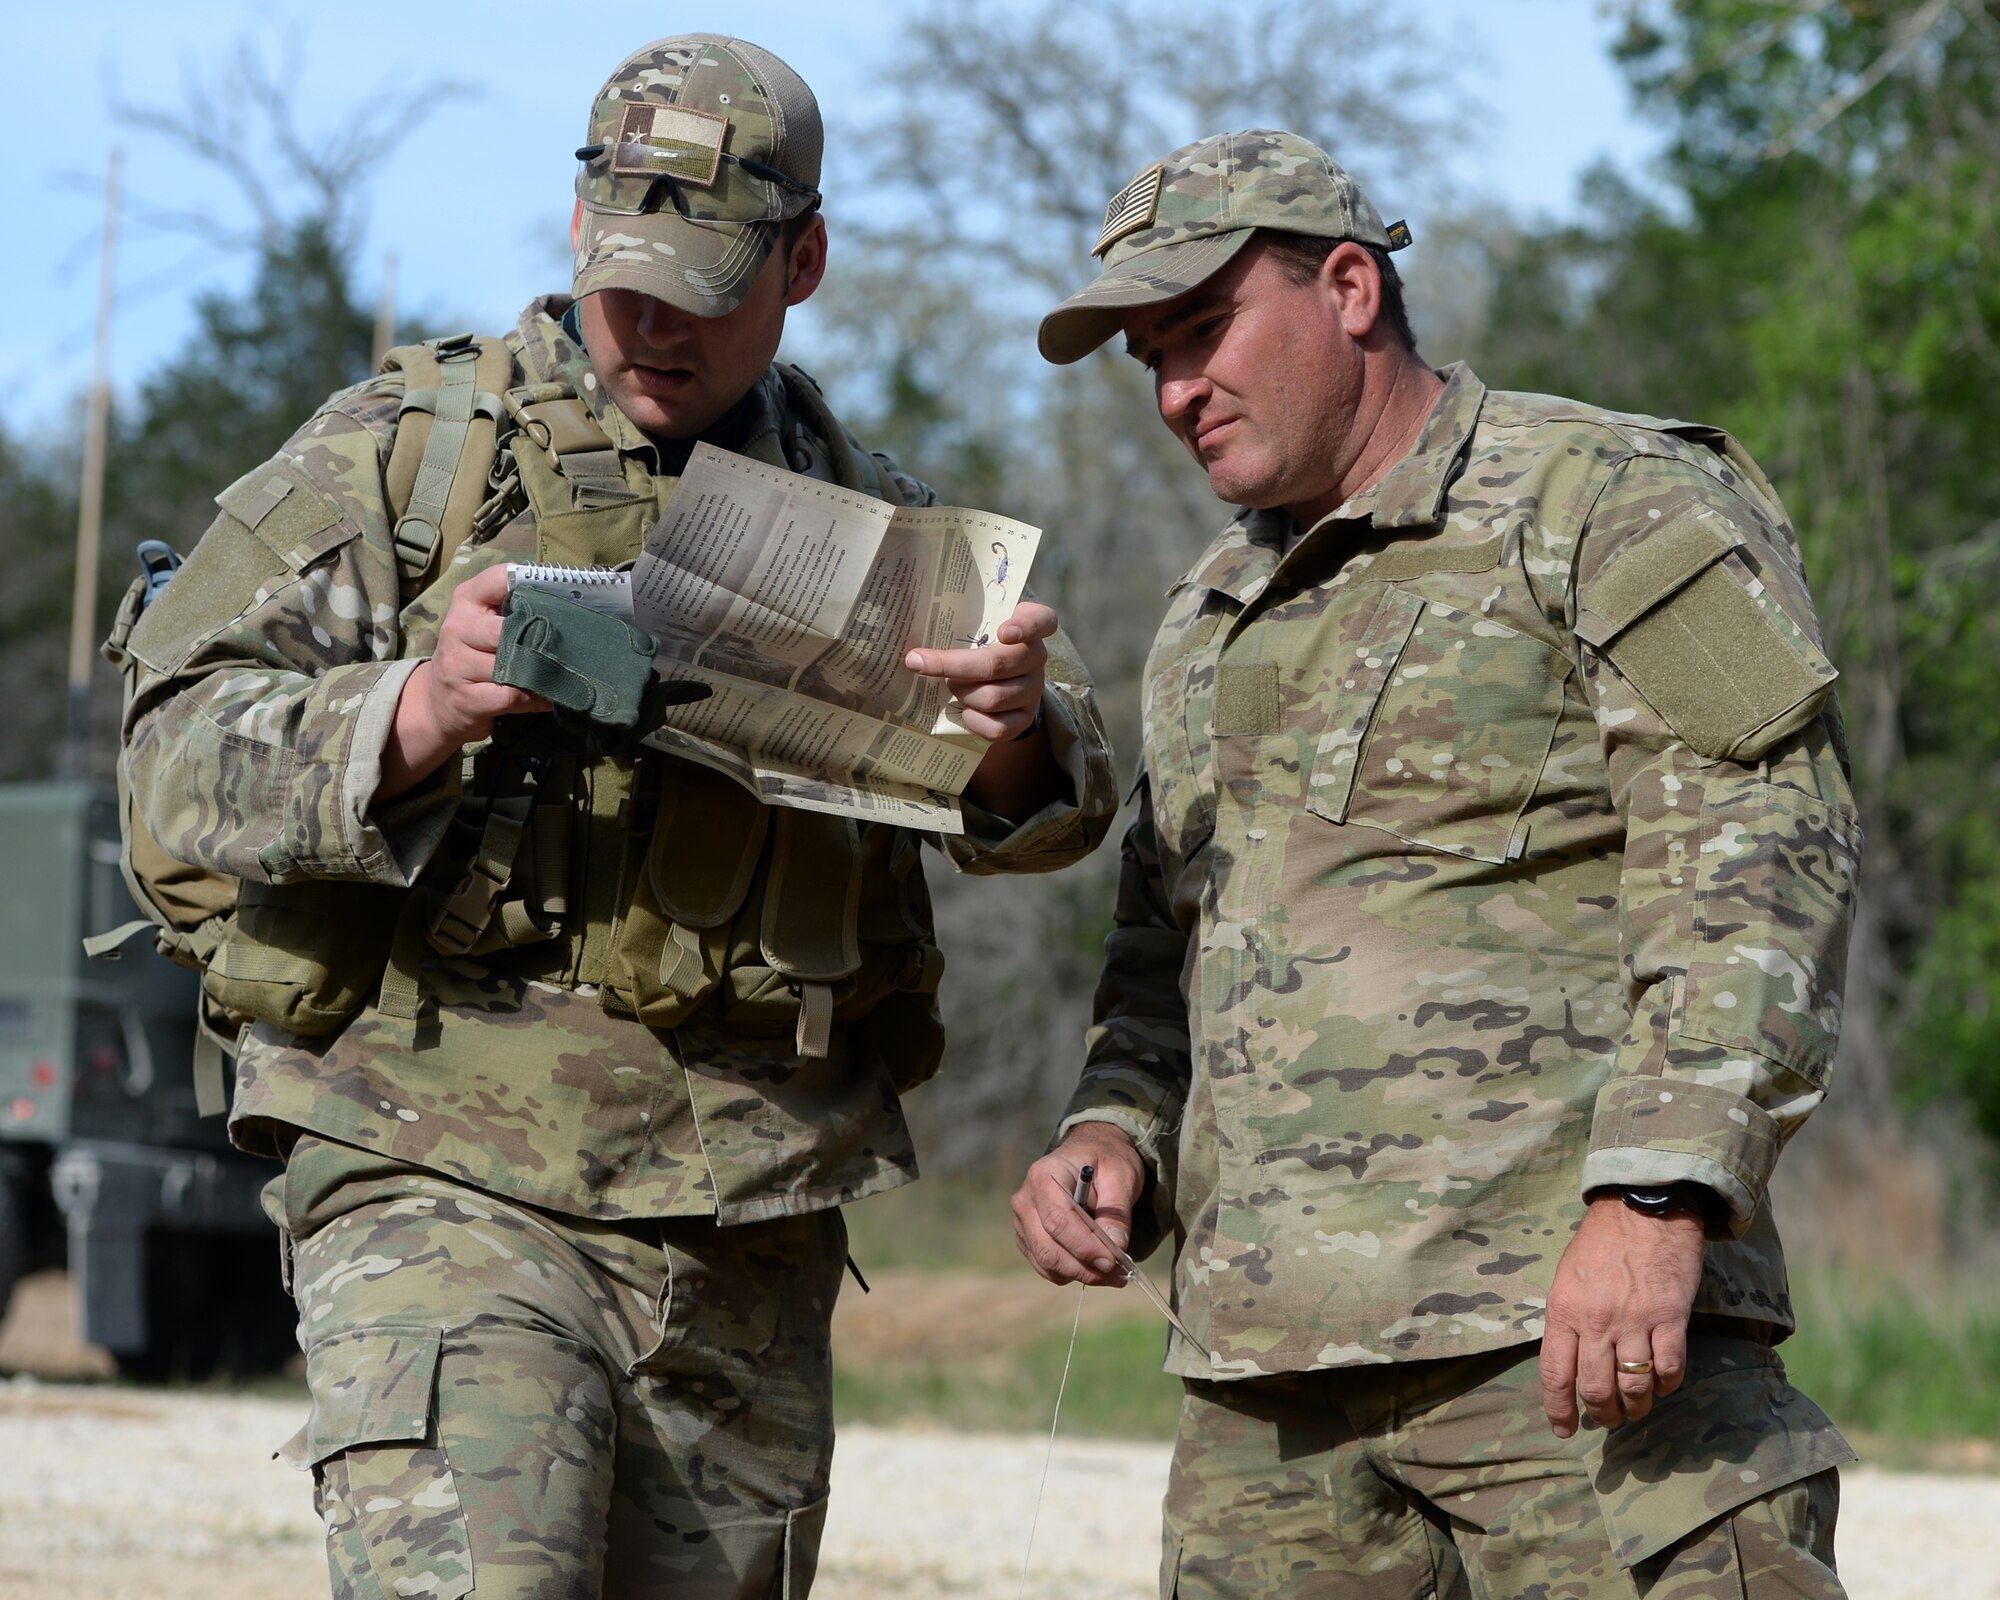 Two tactical air control party members from the 147th Air Support Operations Squadron, 147th Reconnaissance Wing, based at Ellington Field Joint Reserve Base in Houston, Texas, prepare to navigate to their first point during a land navigation exercise at Camp Swift in Bastrop, Texas. The squadron travelled to the camp to perform a weeklong field training exercise that allowed the members to maintain their proficiency in their career field.